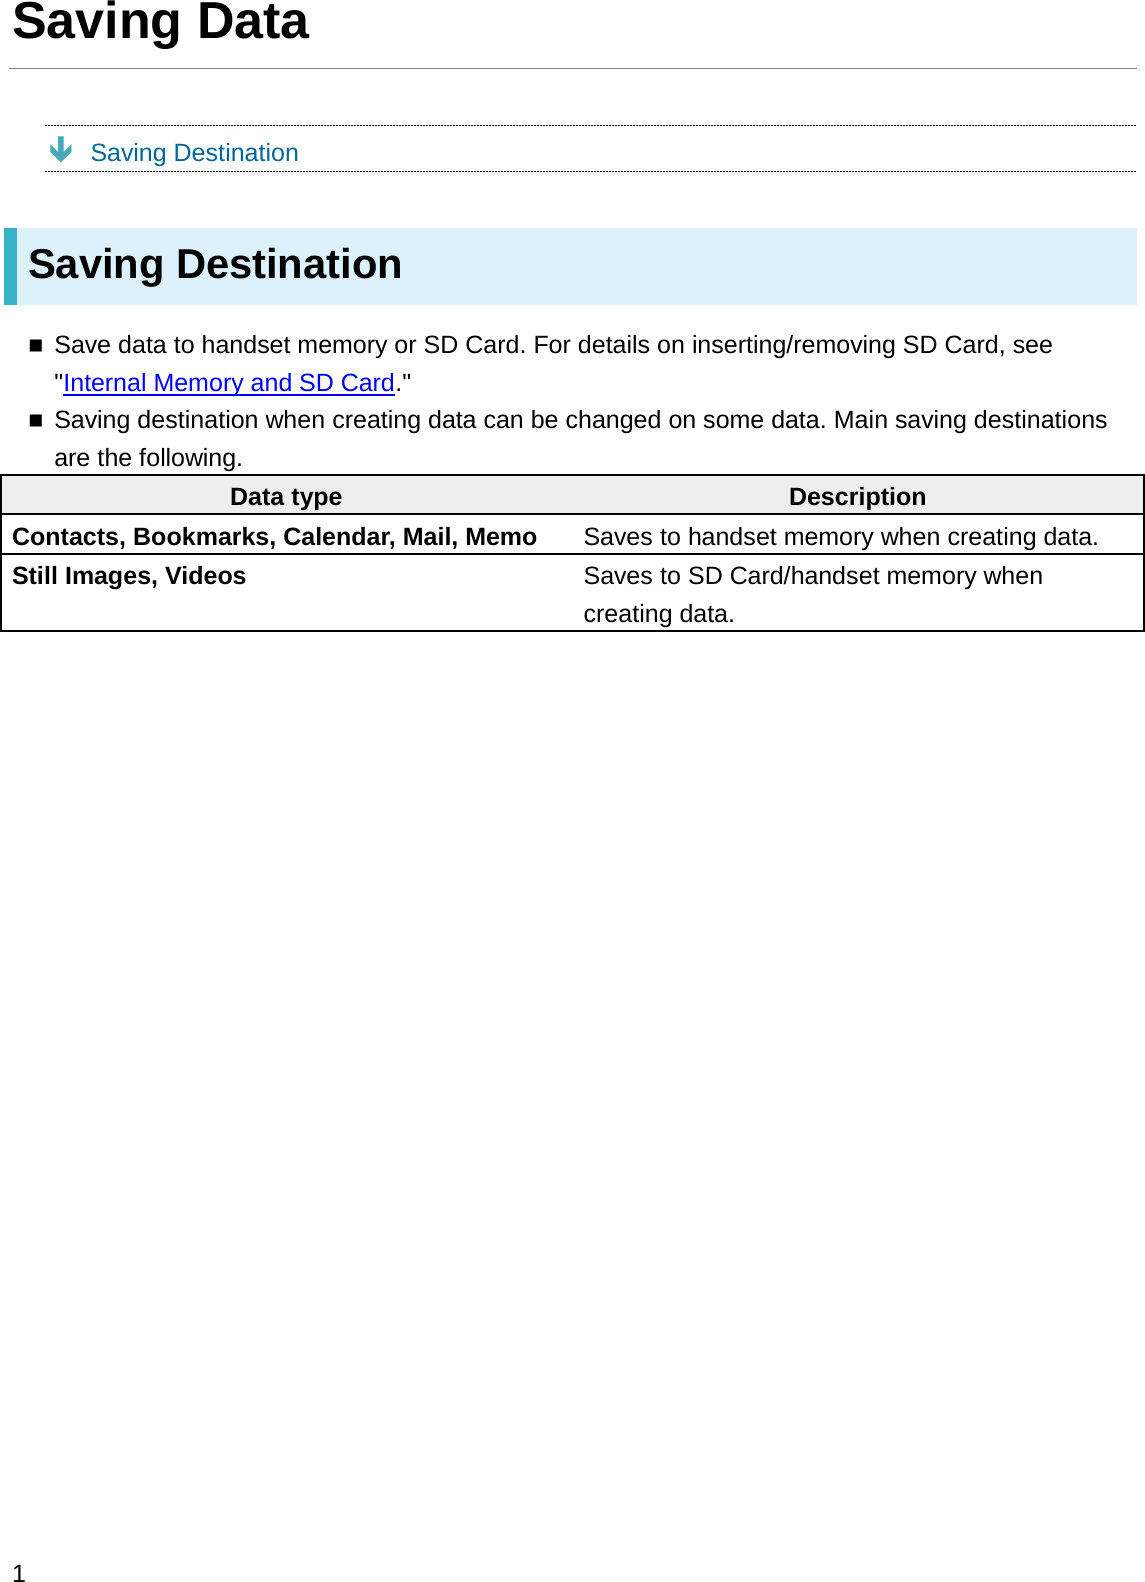 Saving DataÐSaving DestinationSaving DestinationSave data to handset memory or SD Card. For details on inserting/removing SD Card, see &quot;Internal Memory and SD Card.&quot;Saving destination when creating data can be changed on some data. Main saving destinations are the following.Data type DescriptionContacts, Bookmarks, Calendar, Mail, Memo Saves to handset memory when creating data.Still Images, Videos Saves to SD Card/handset memory when creating data.1